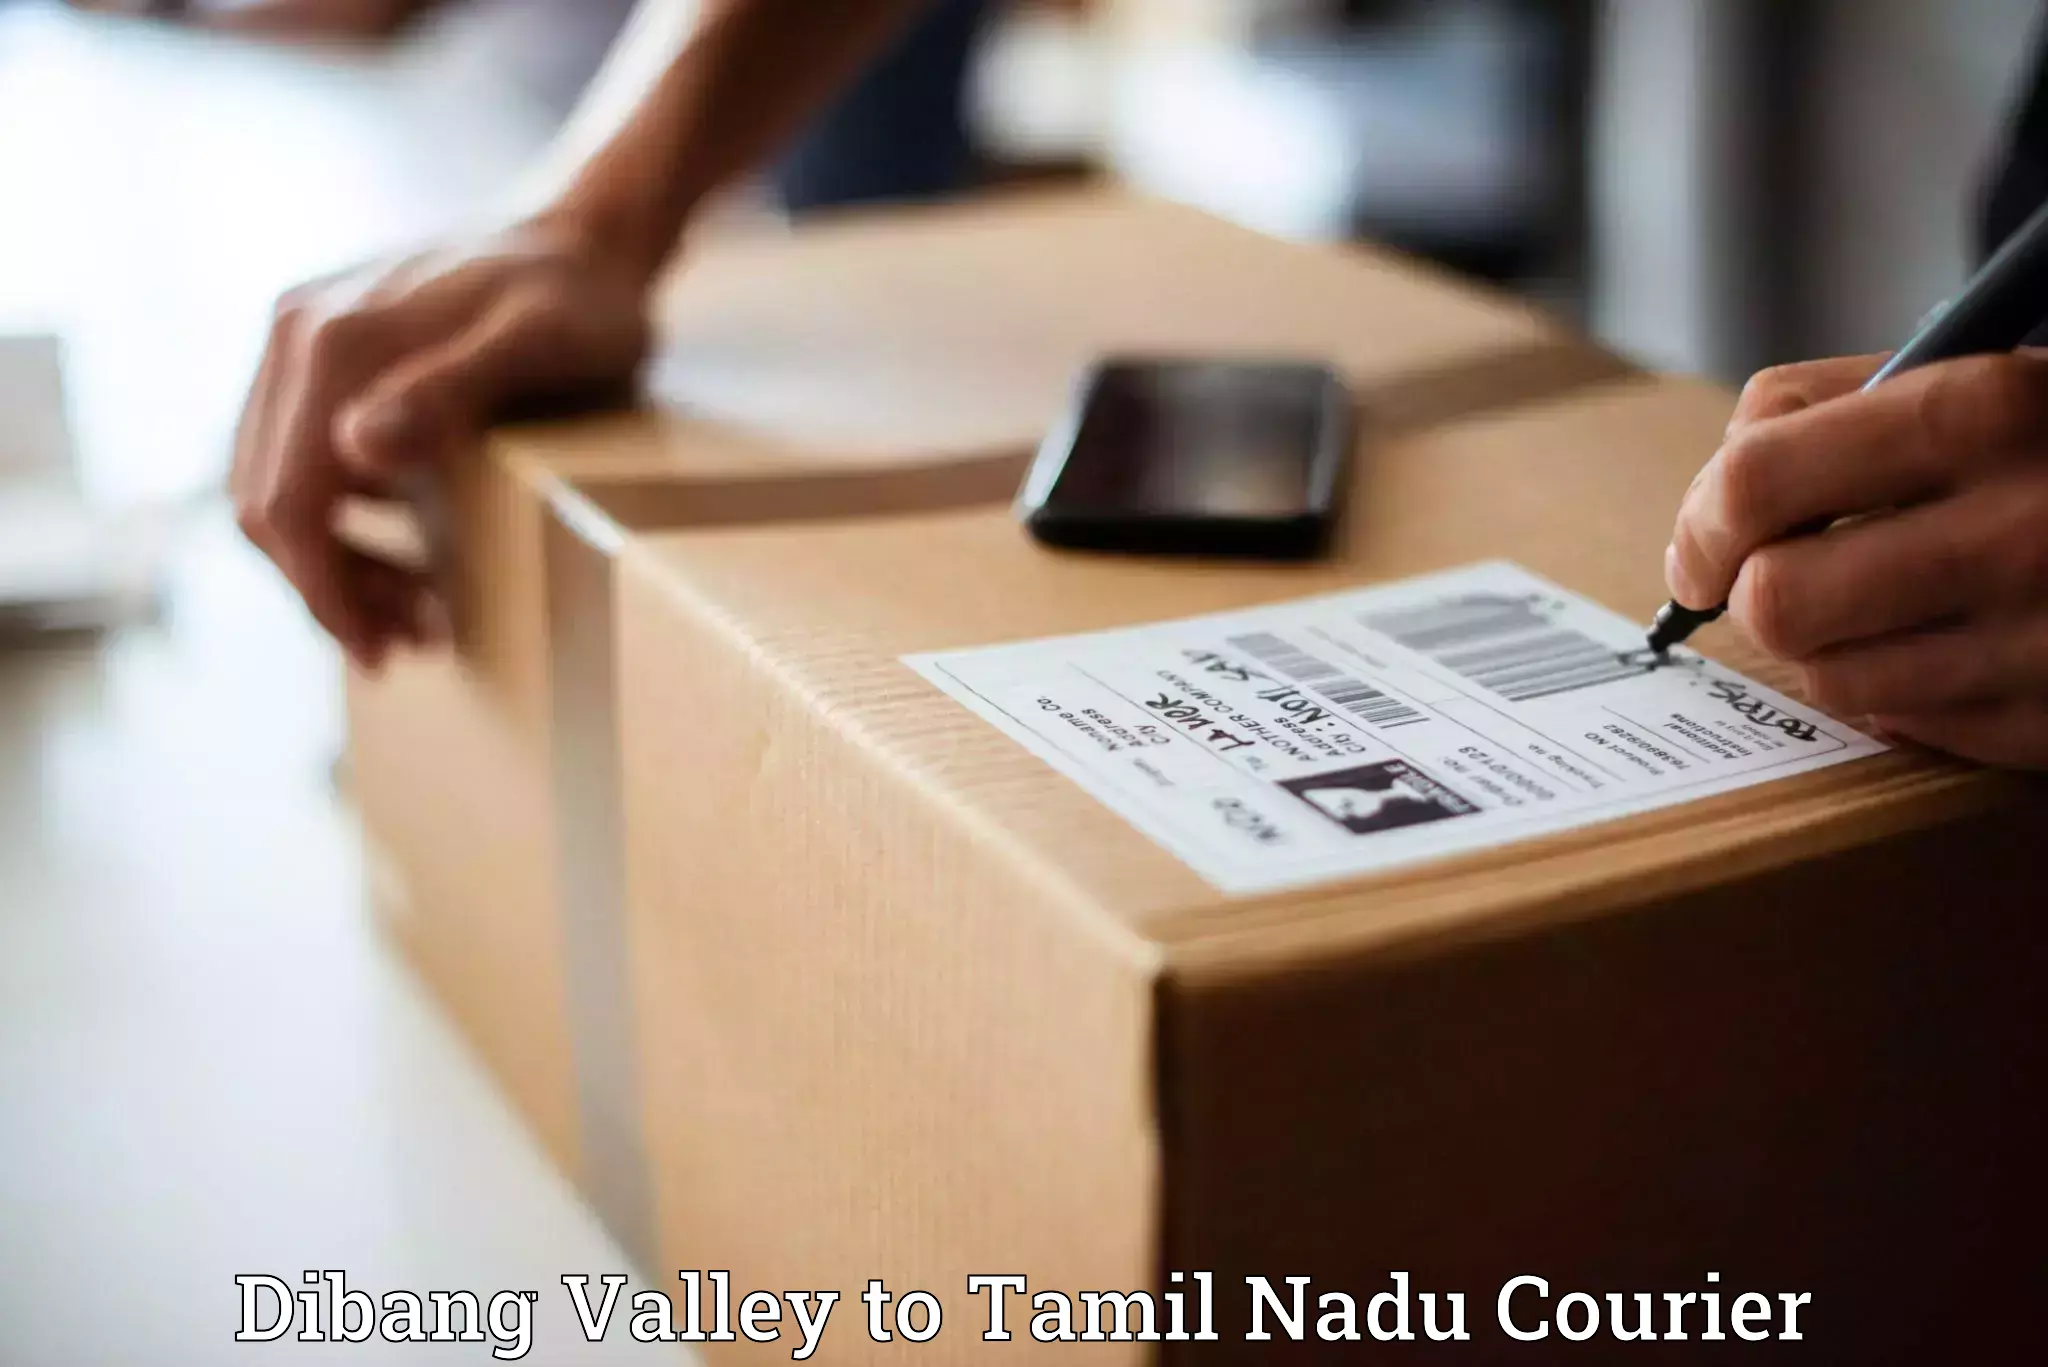 Courier membership Dibang Valley to Ennore Port Chennai